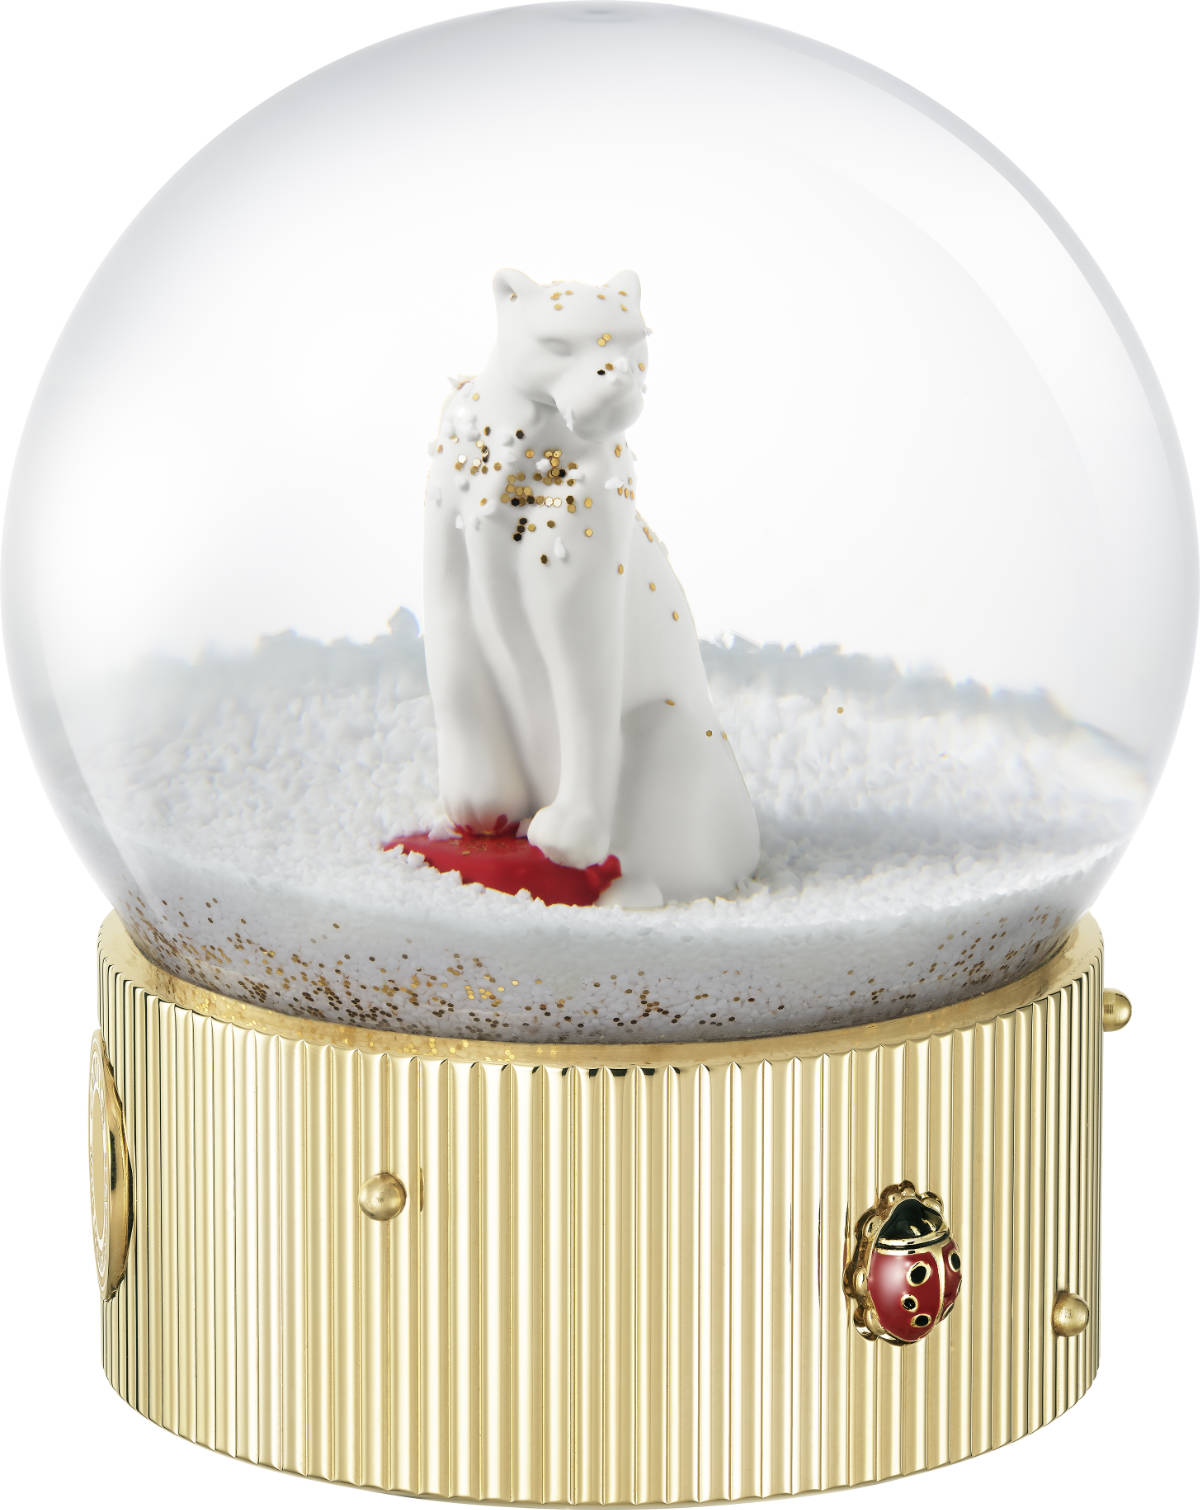 Wishlist Special: Cartier Objects Bear A Sense Of Excitement